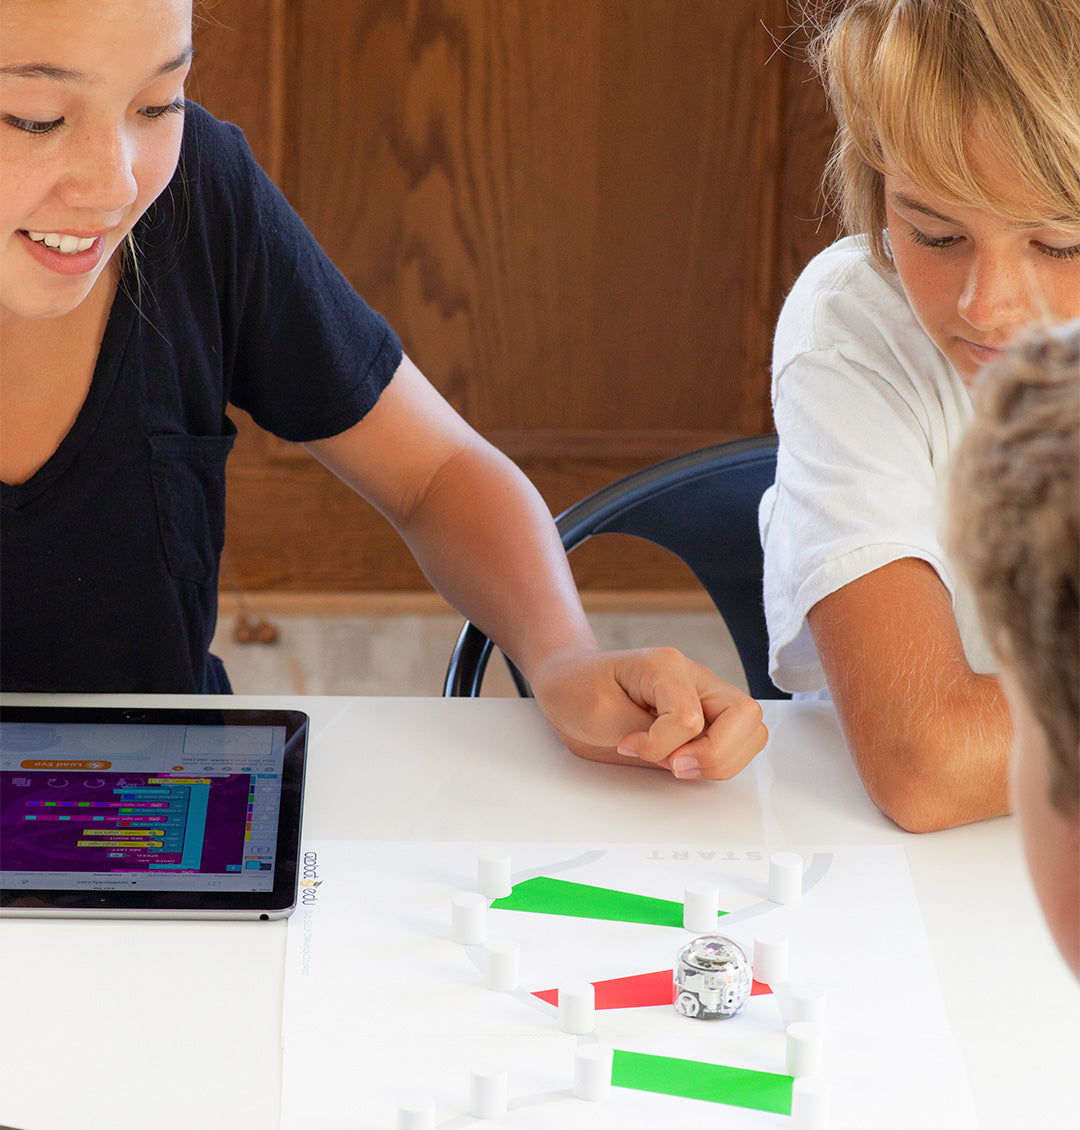 Virtual Professional Development by Ozobot - online training sessions for 10 attendees